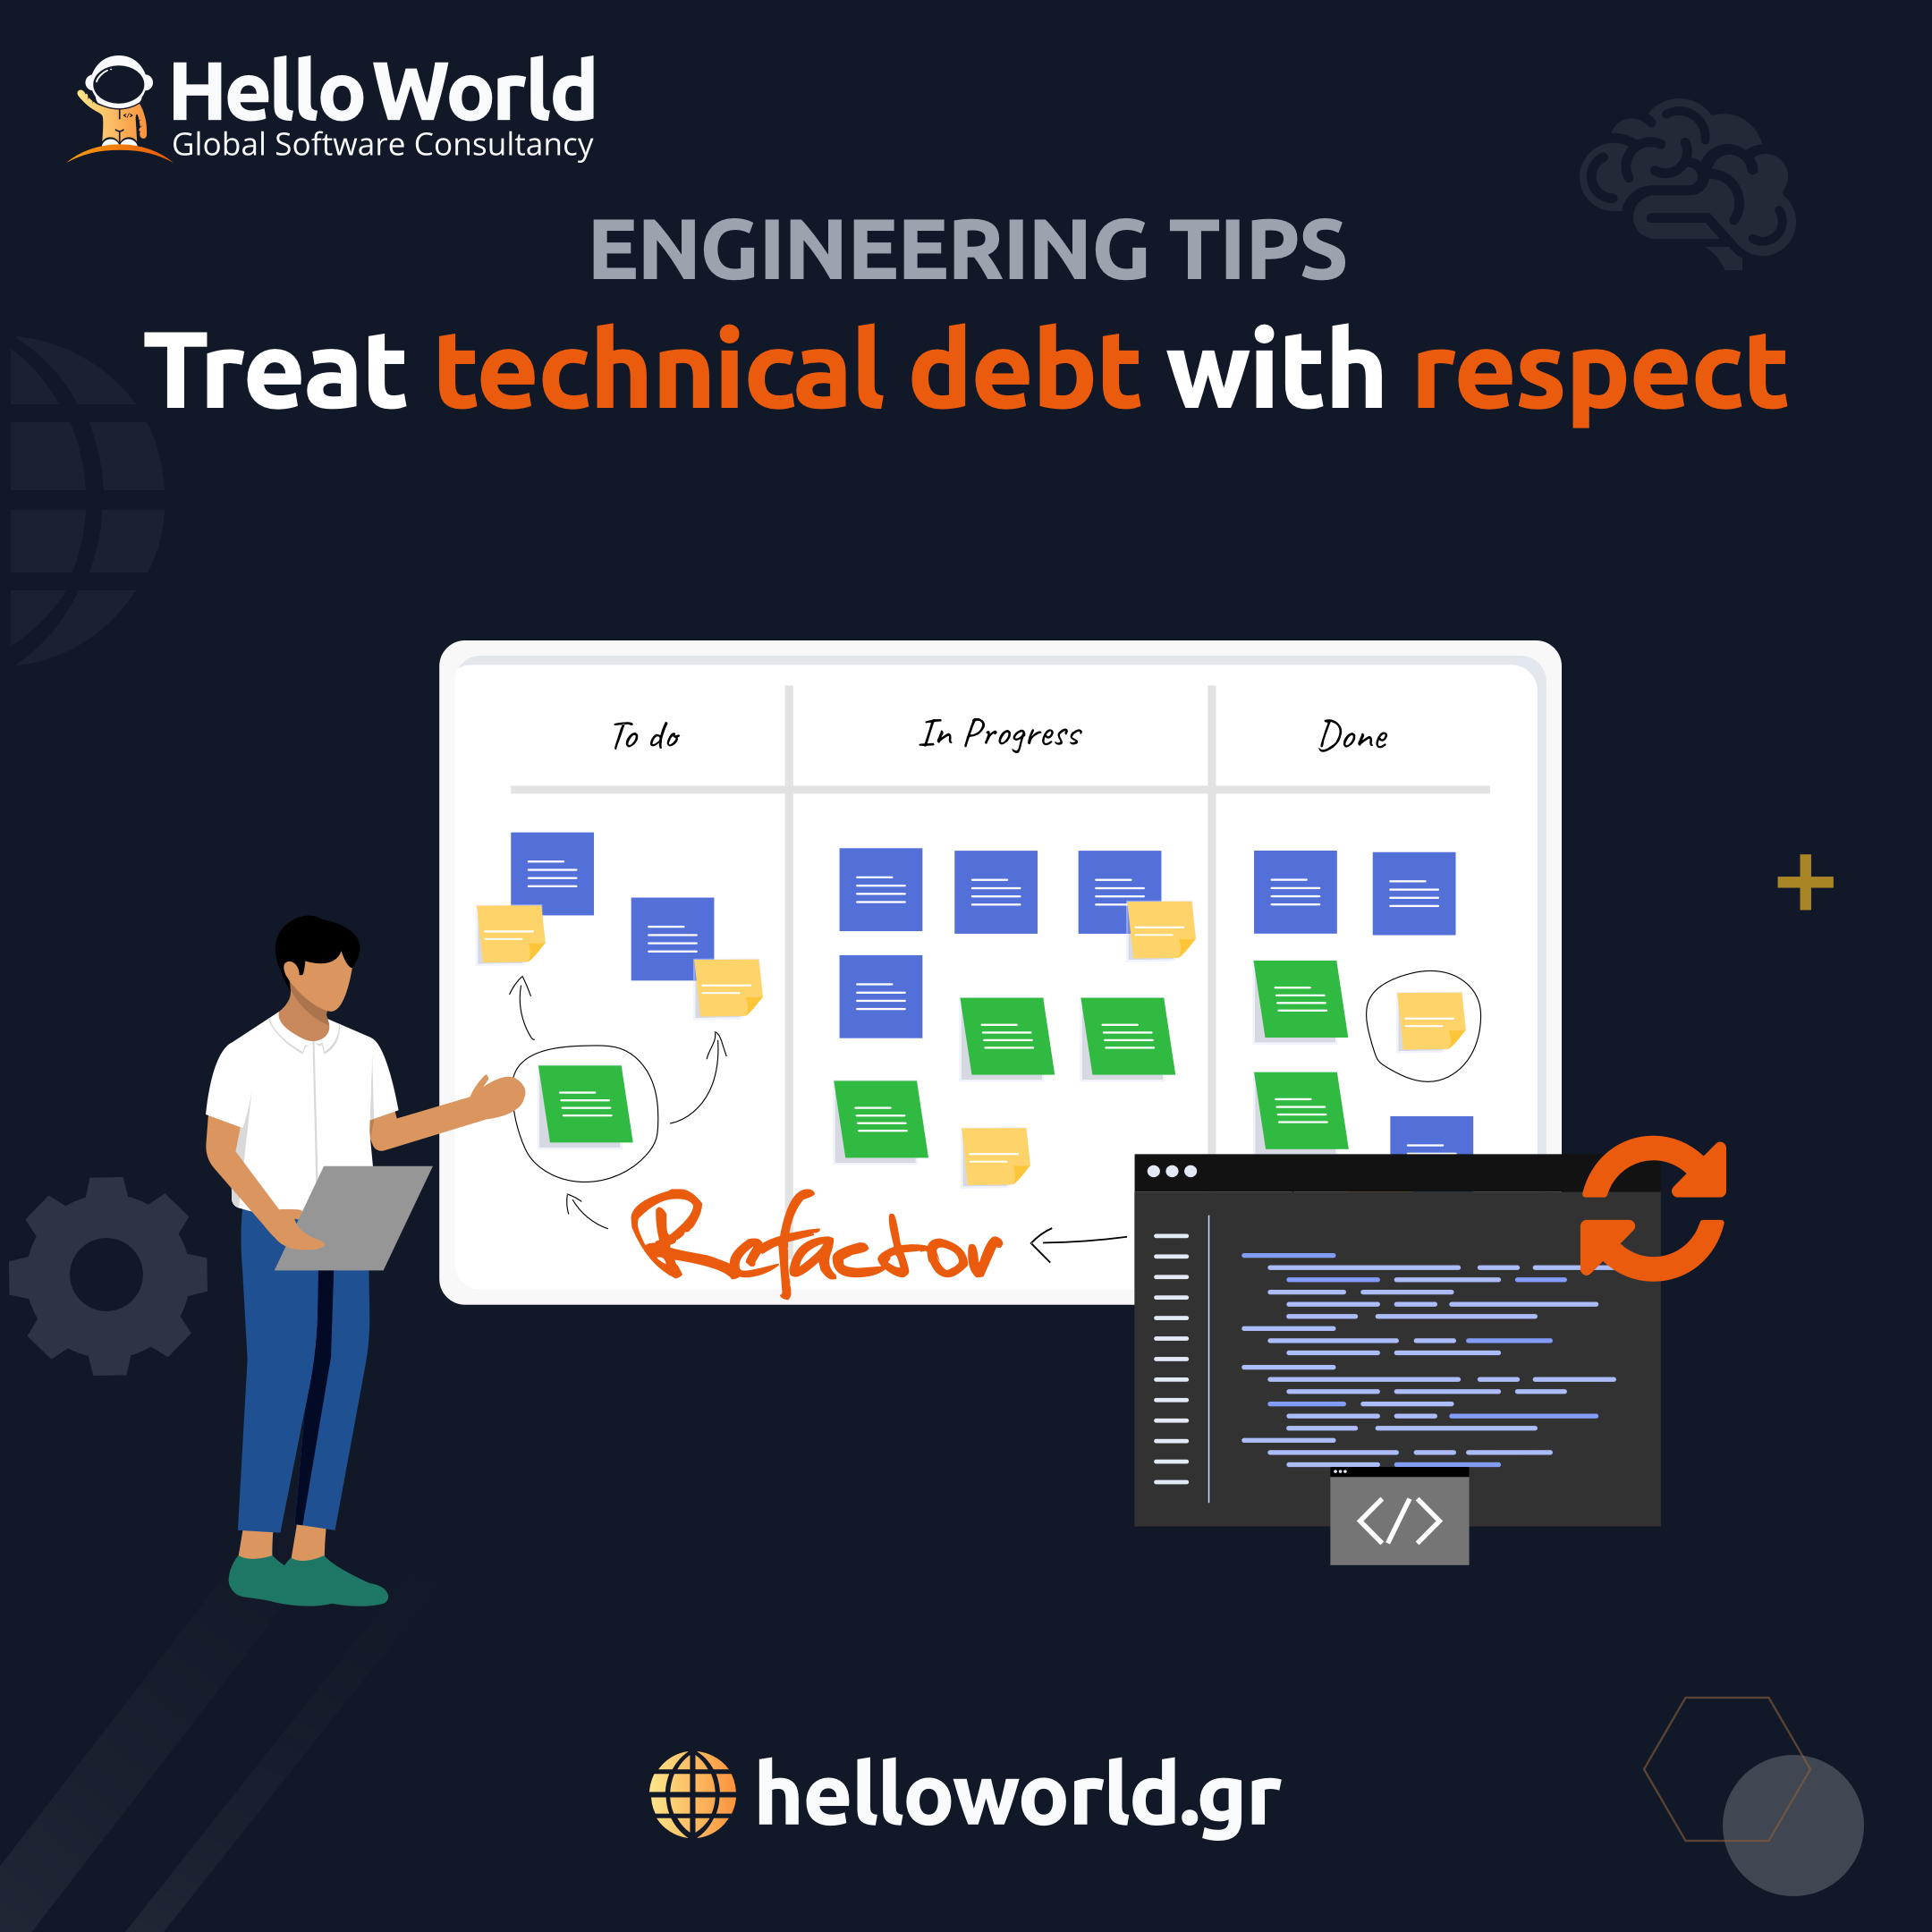 Treat technical debt with respect